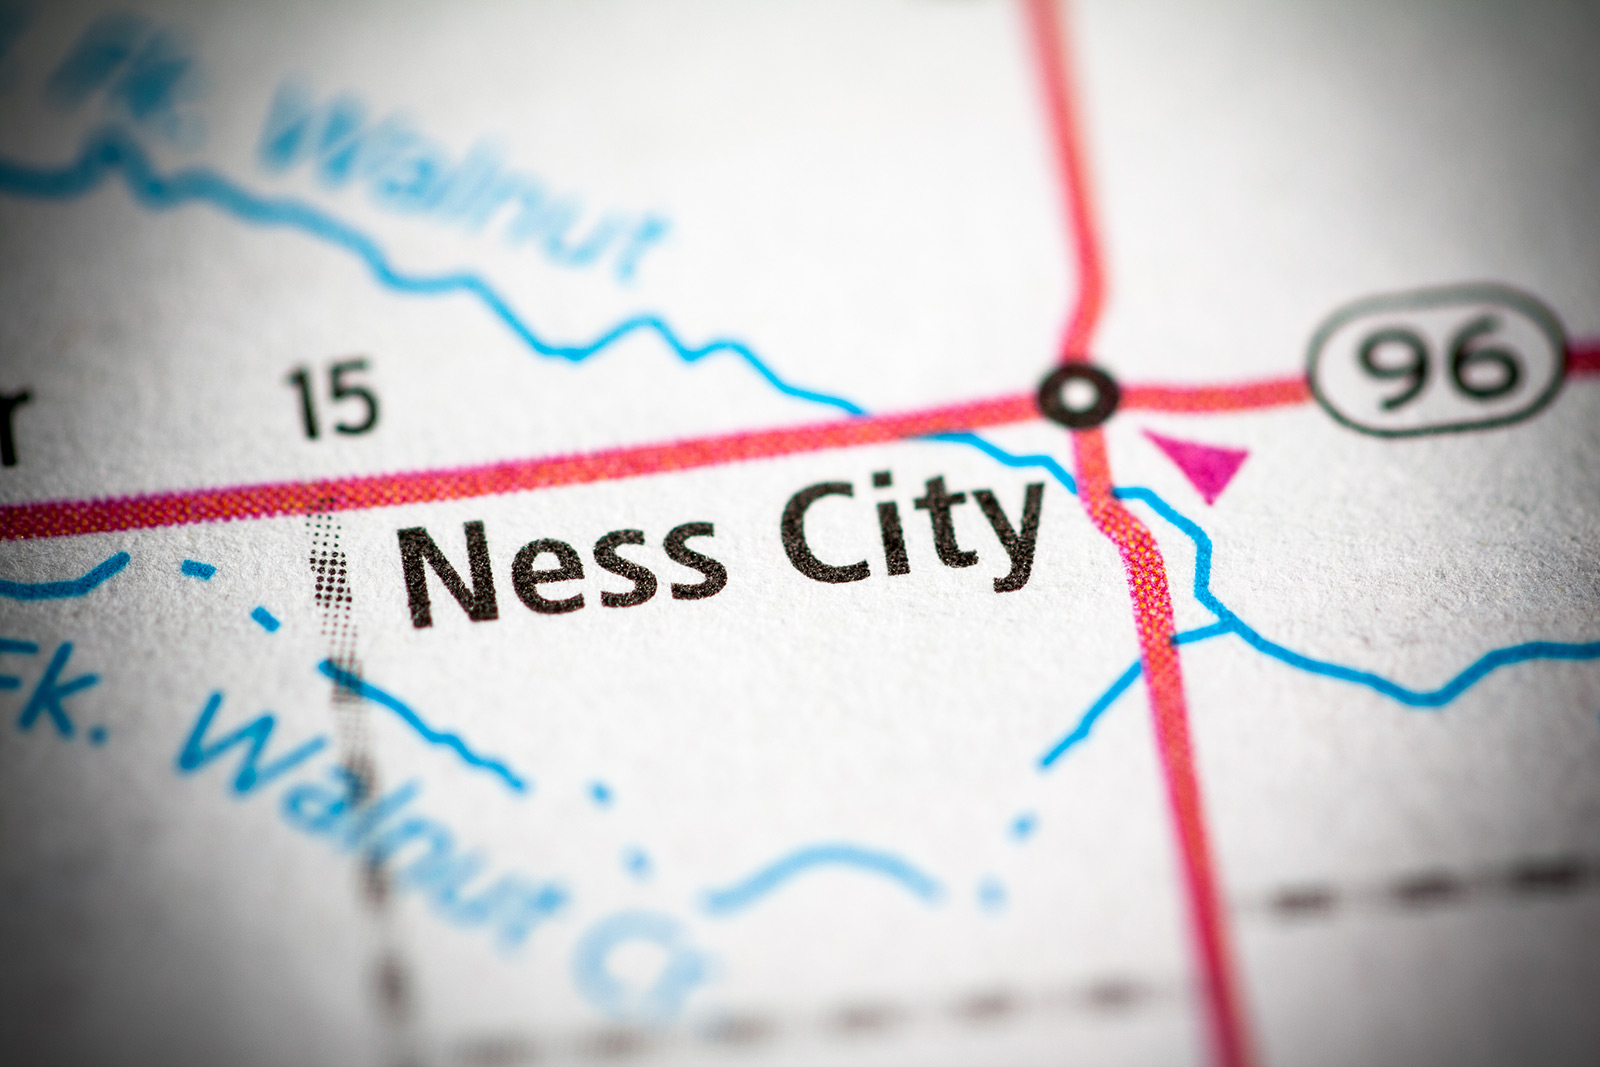 Close-up photo of a paper map showing Ness City and Route 96.